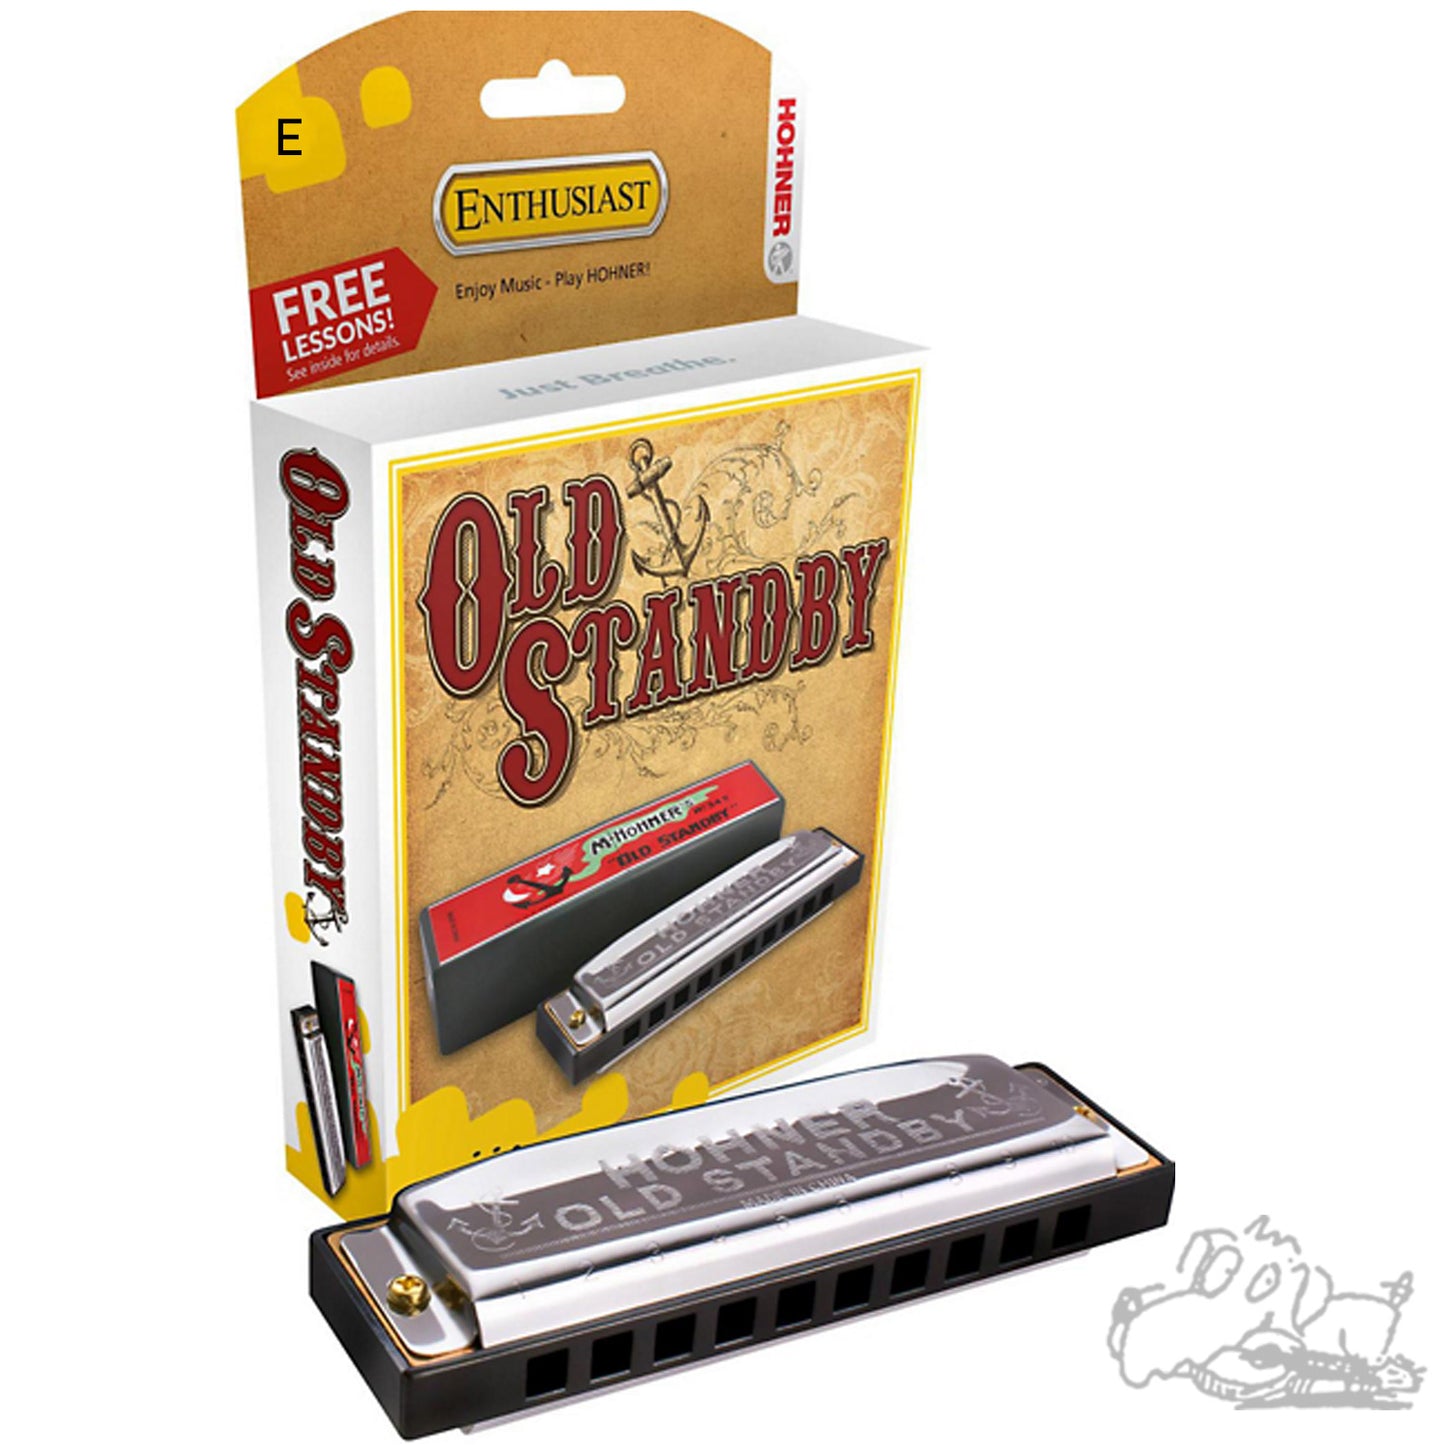 Hohner Old Standby Harmonica in Assorted Keys - A, Bb, B, C, D, E, F, G